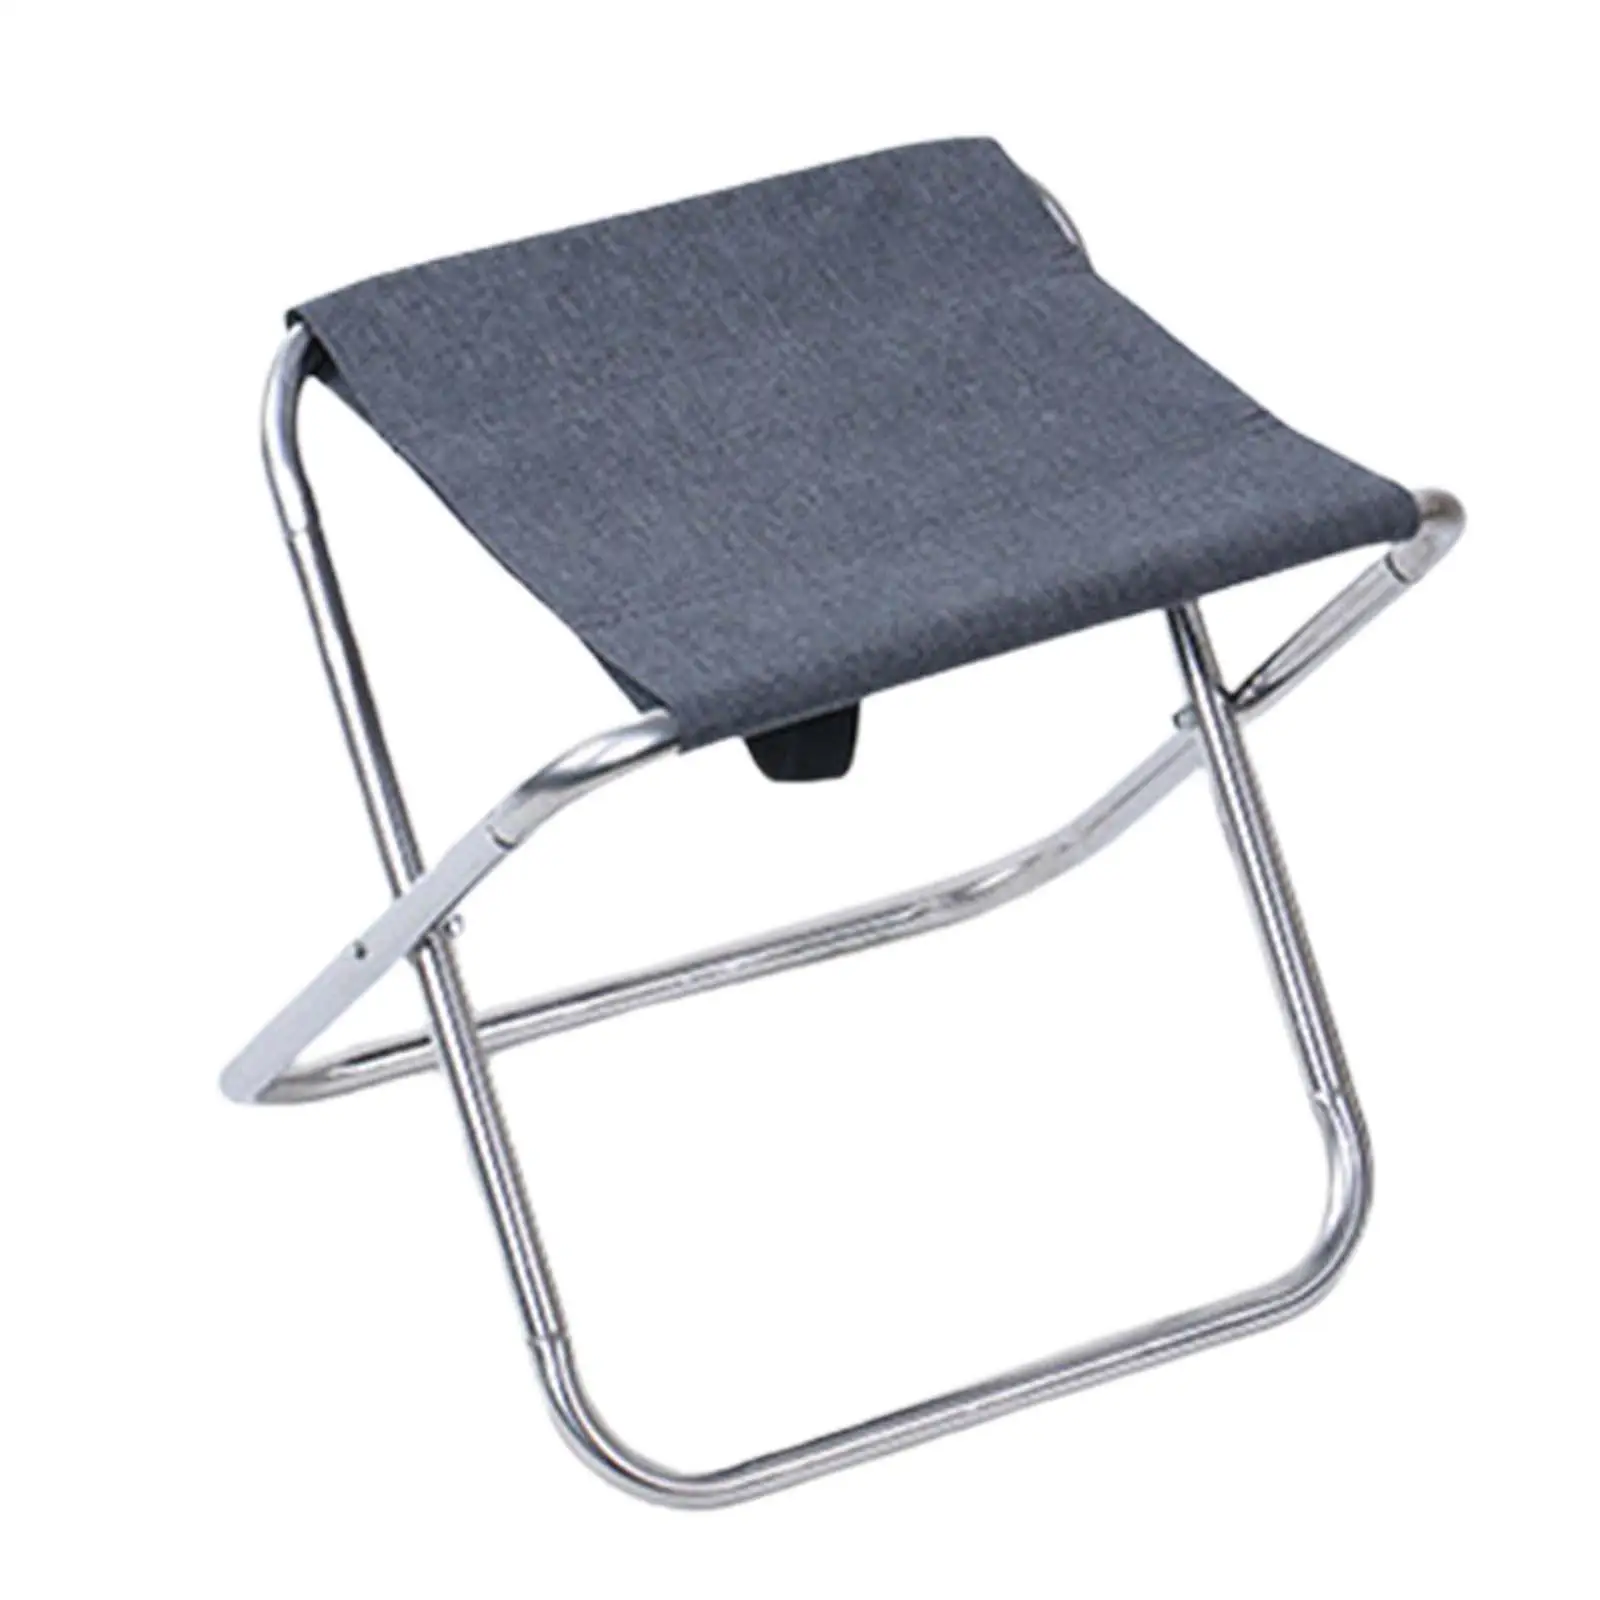 Camping Stool Folding Picnic Chair Small Collapsible Wear Resistant Portable for Concert Gardening Backpacking Backyard Hiking